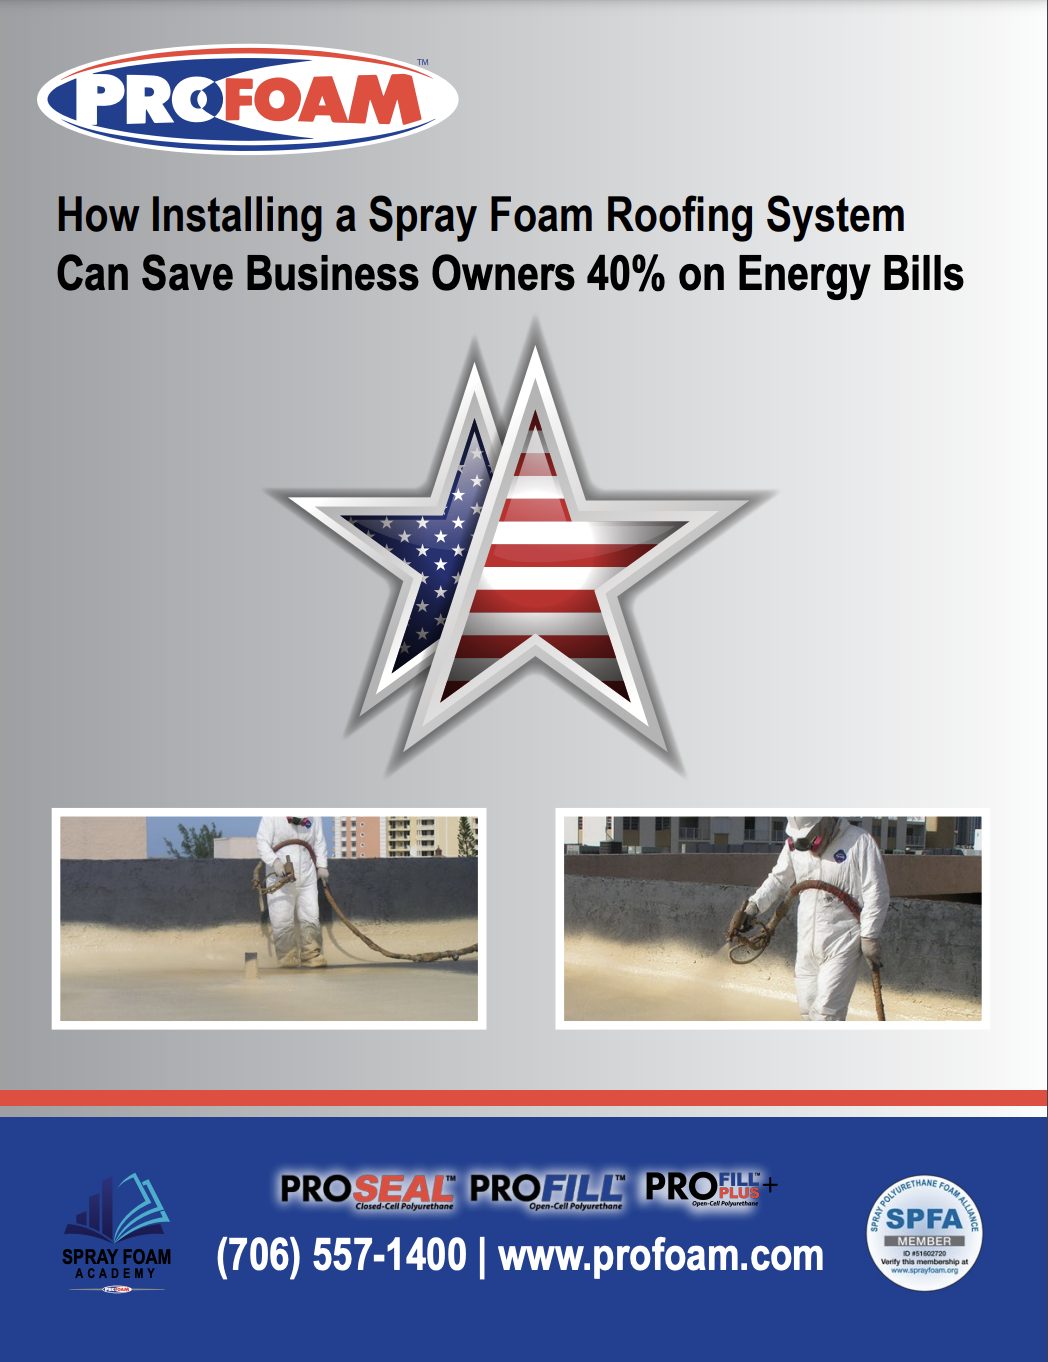 How Installing a Spray Foam Roofing System Can Save Business Owners 40% on Energy Bills